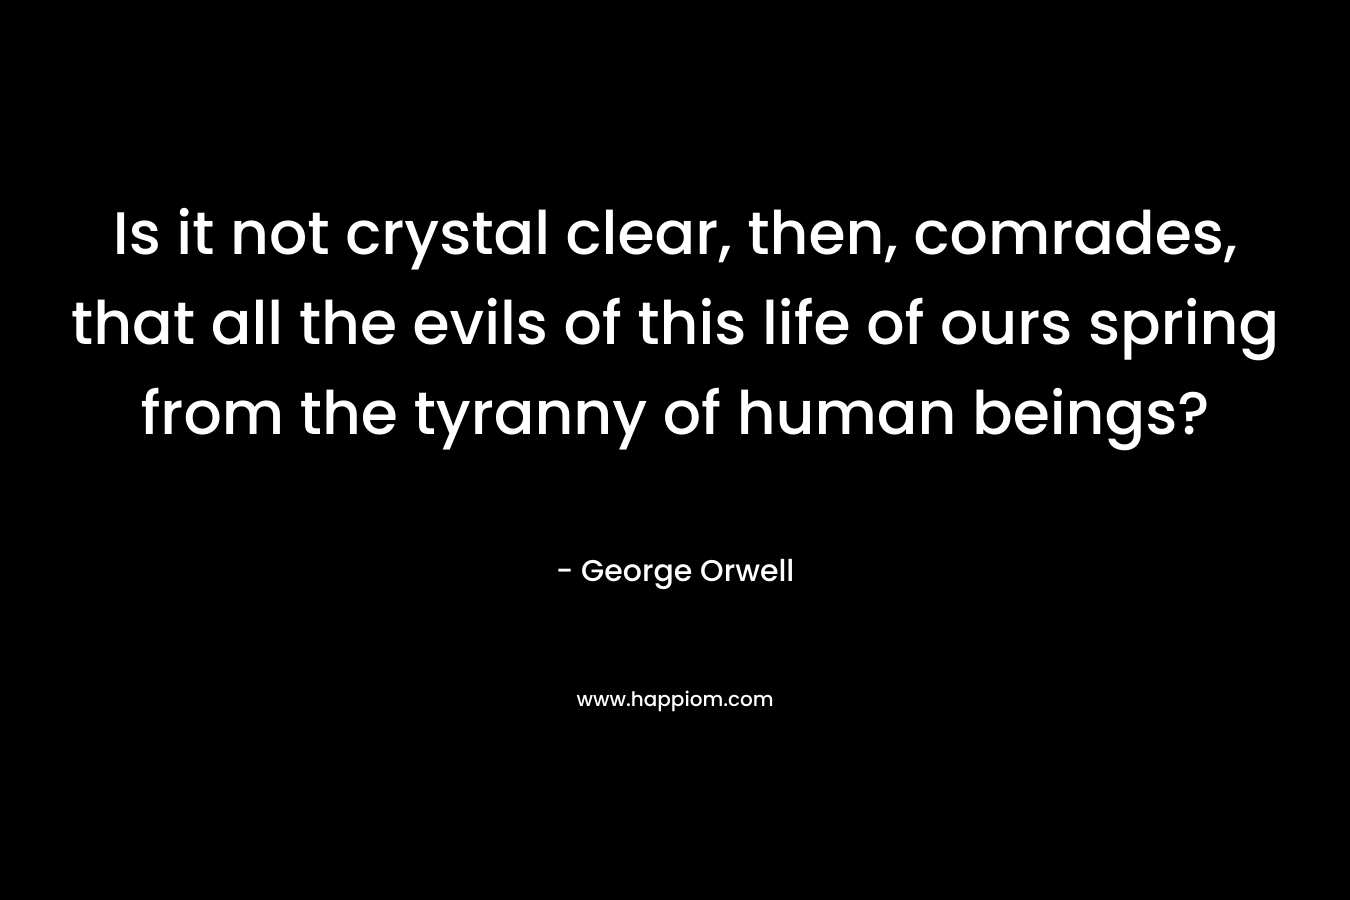 Is it not crystal clear, then, comrades, that all the evils of this life of ours spring from the tyranny of human beings?